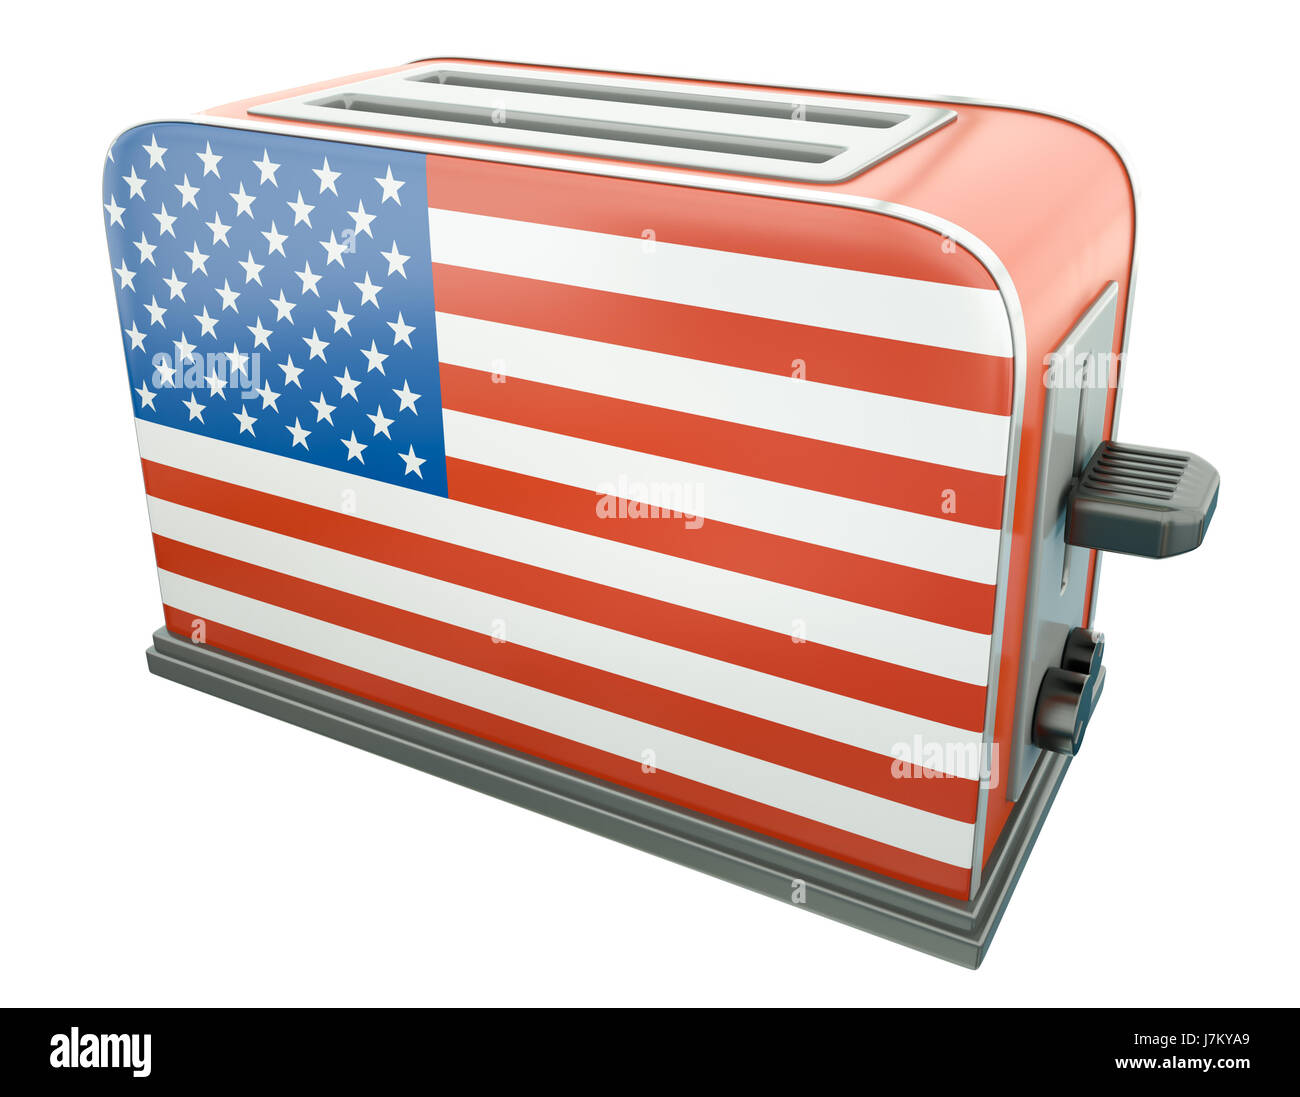 culture american usa flag toasters toaster pictogram symbol pictograph  trade Stock Photo - Alamy